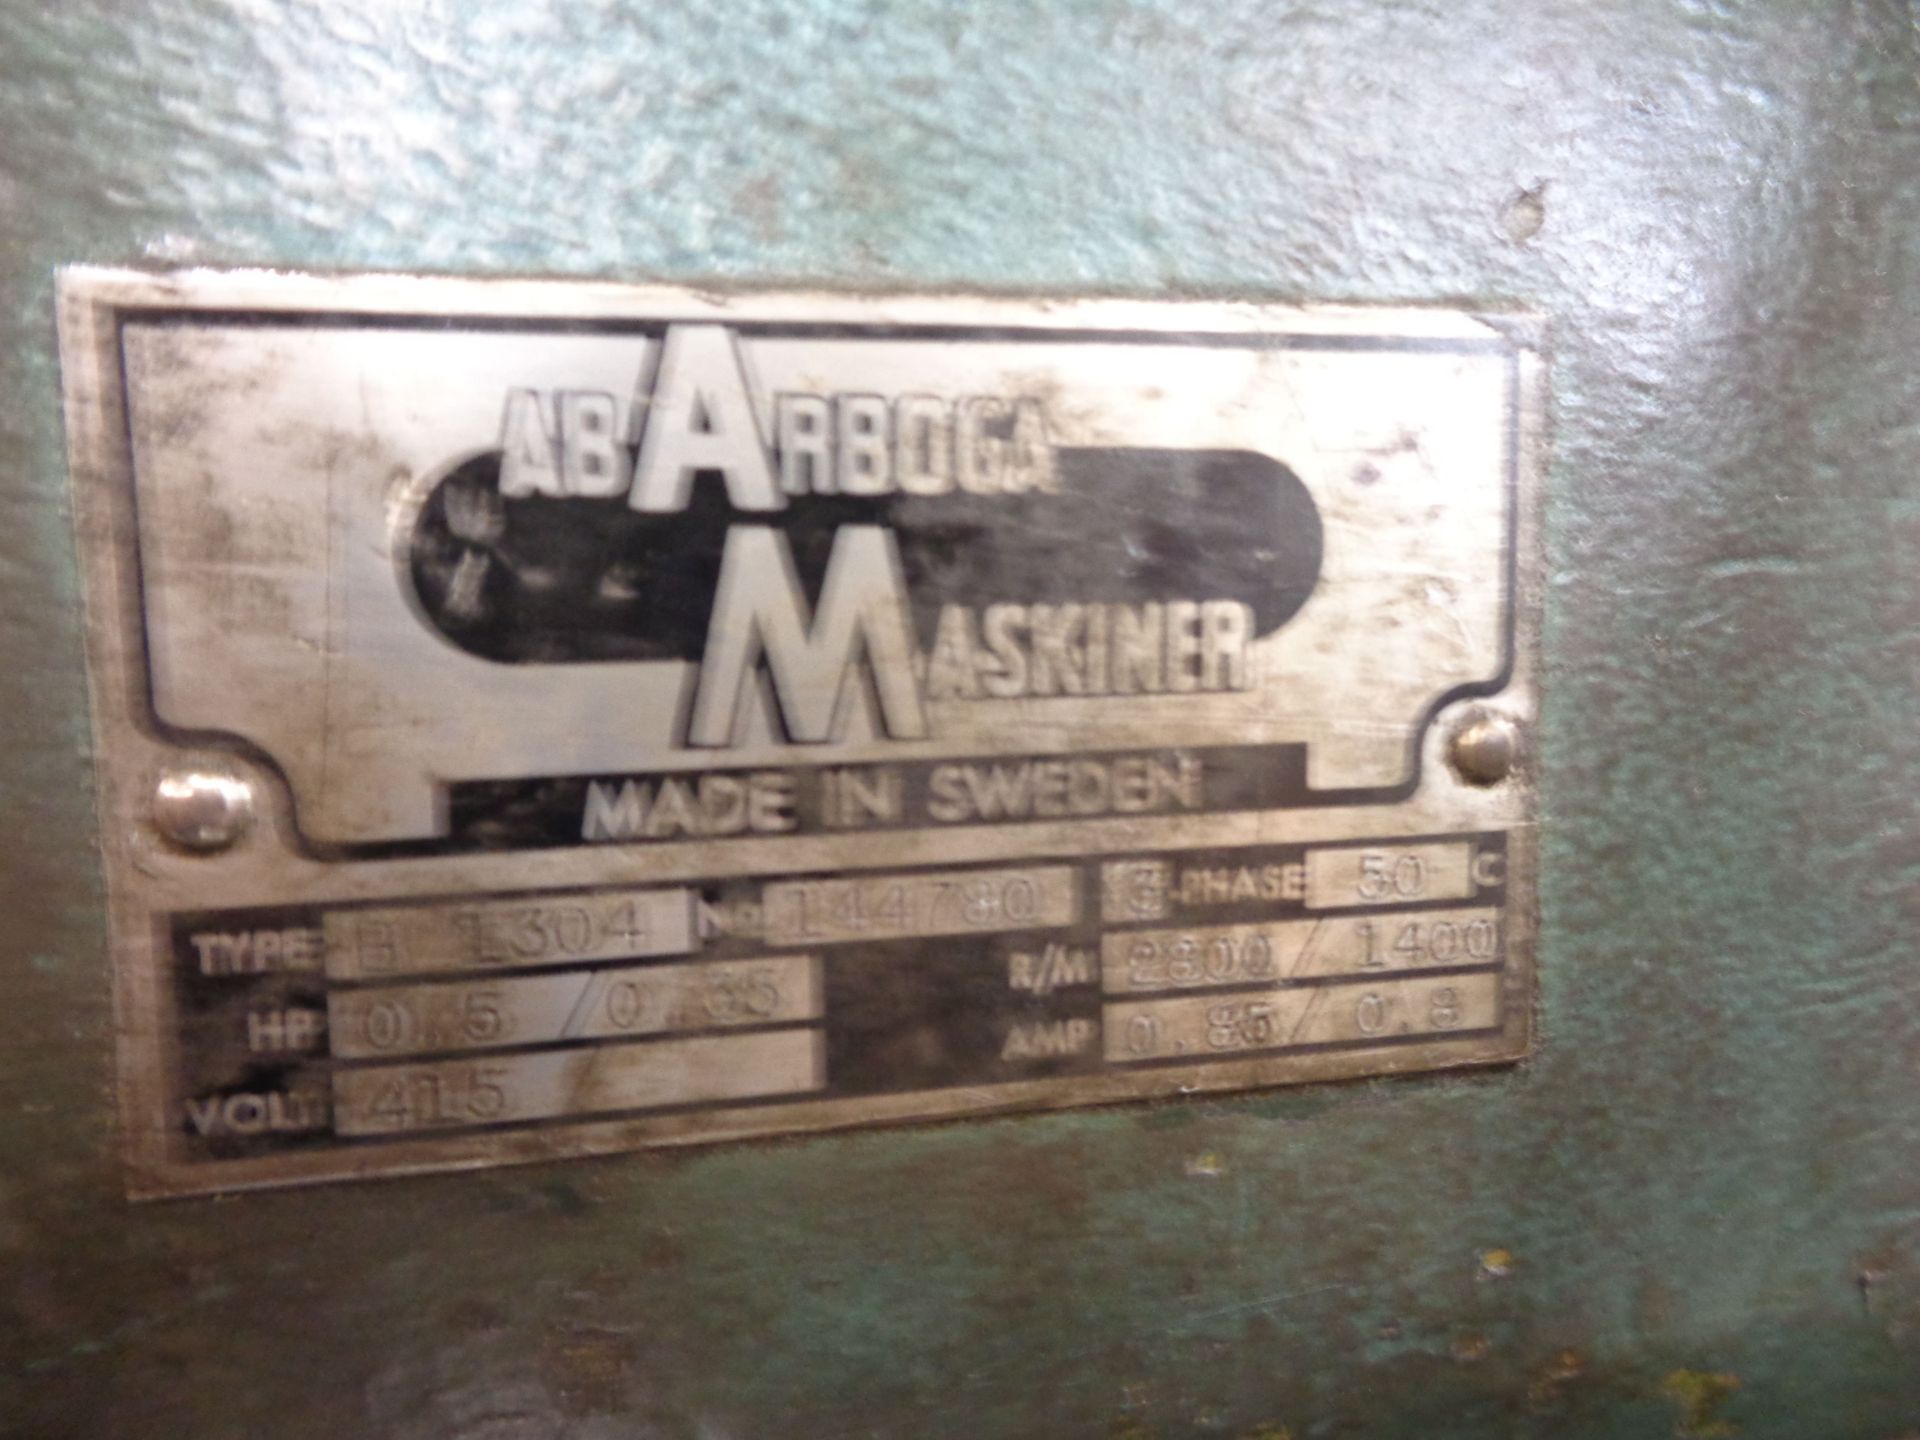 S.E.M.Co AB Arbogan Mushiner B/1304 bench top high speed drill serial no. 144780 - Image 4 of 5